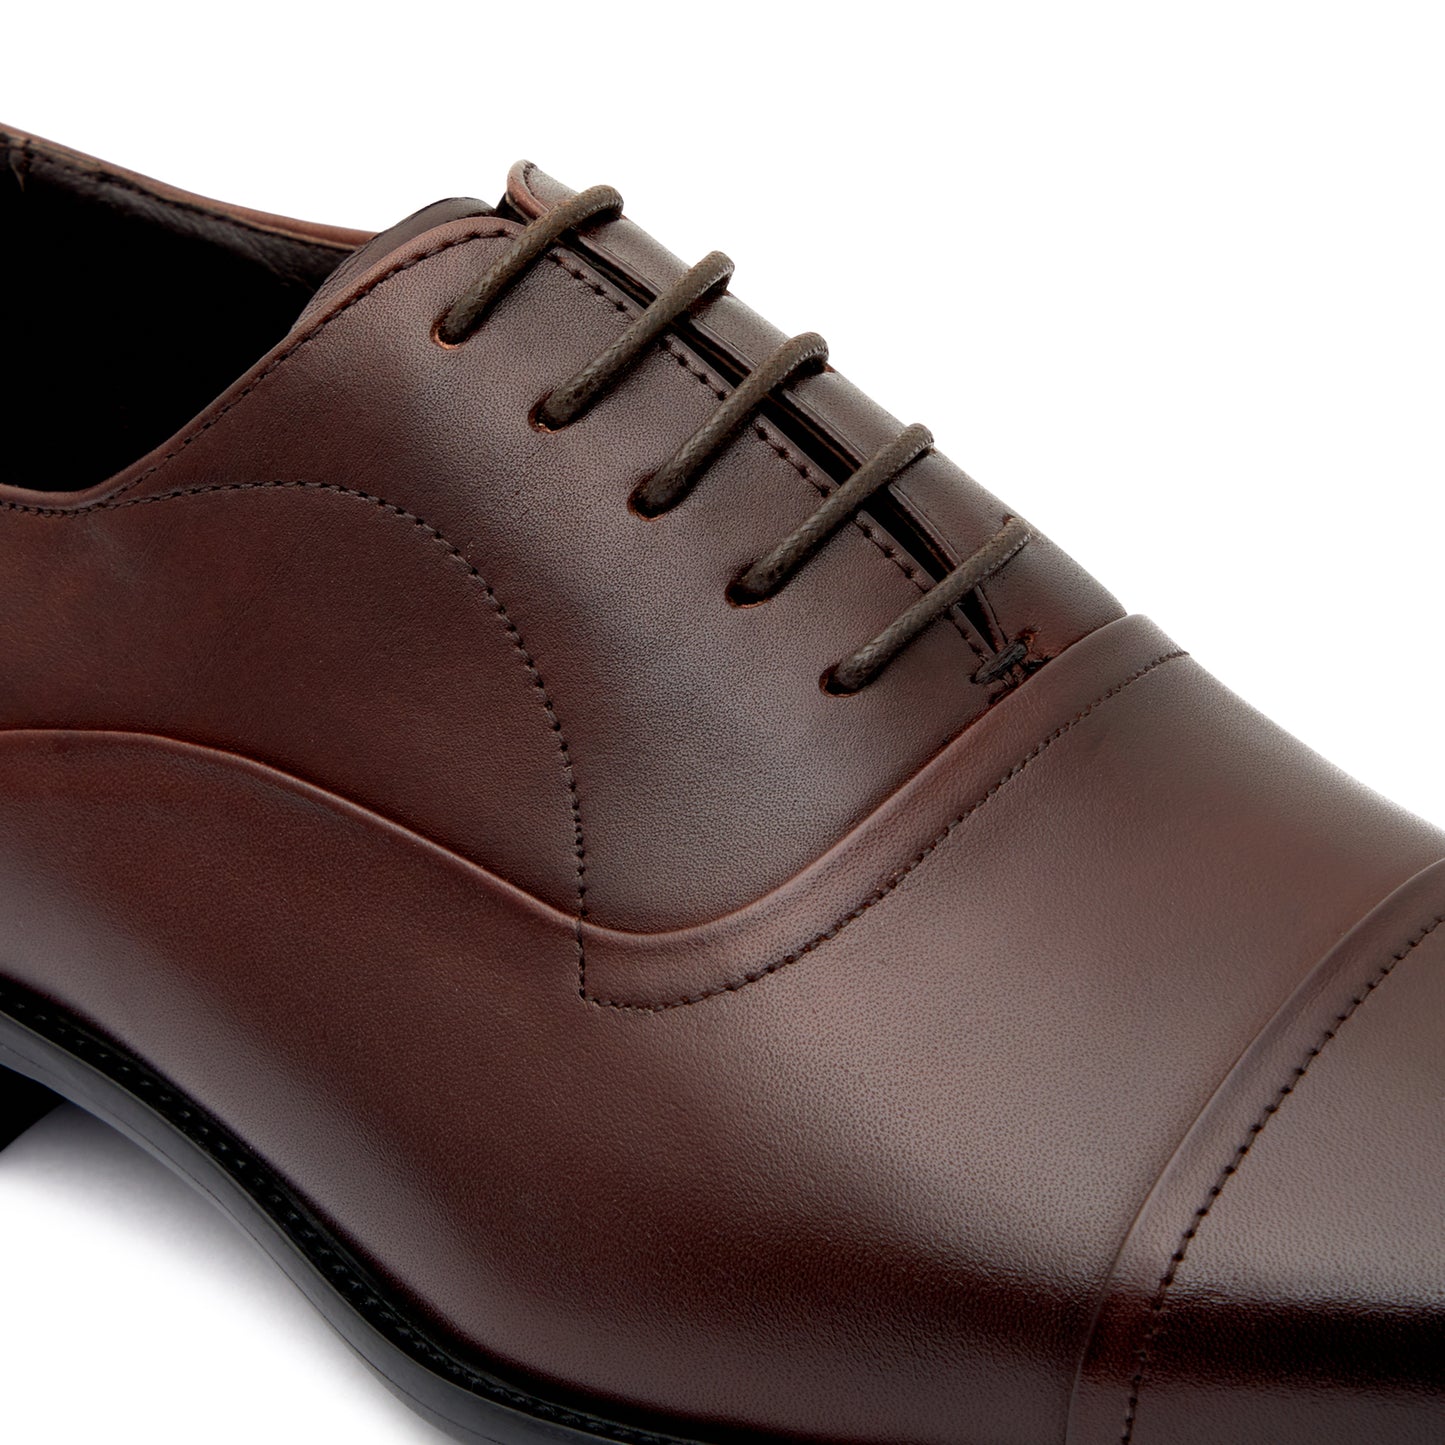 Cole Brown Oxford Shoes